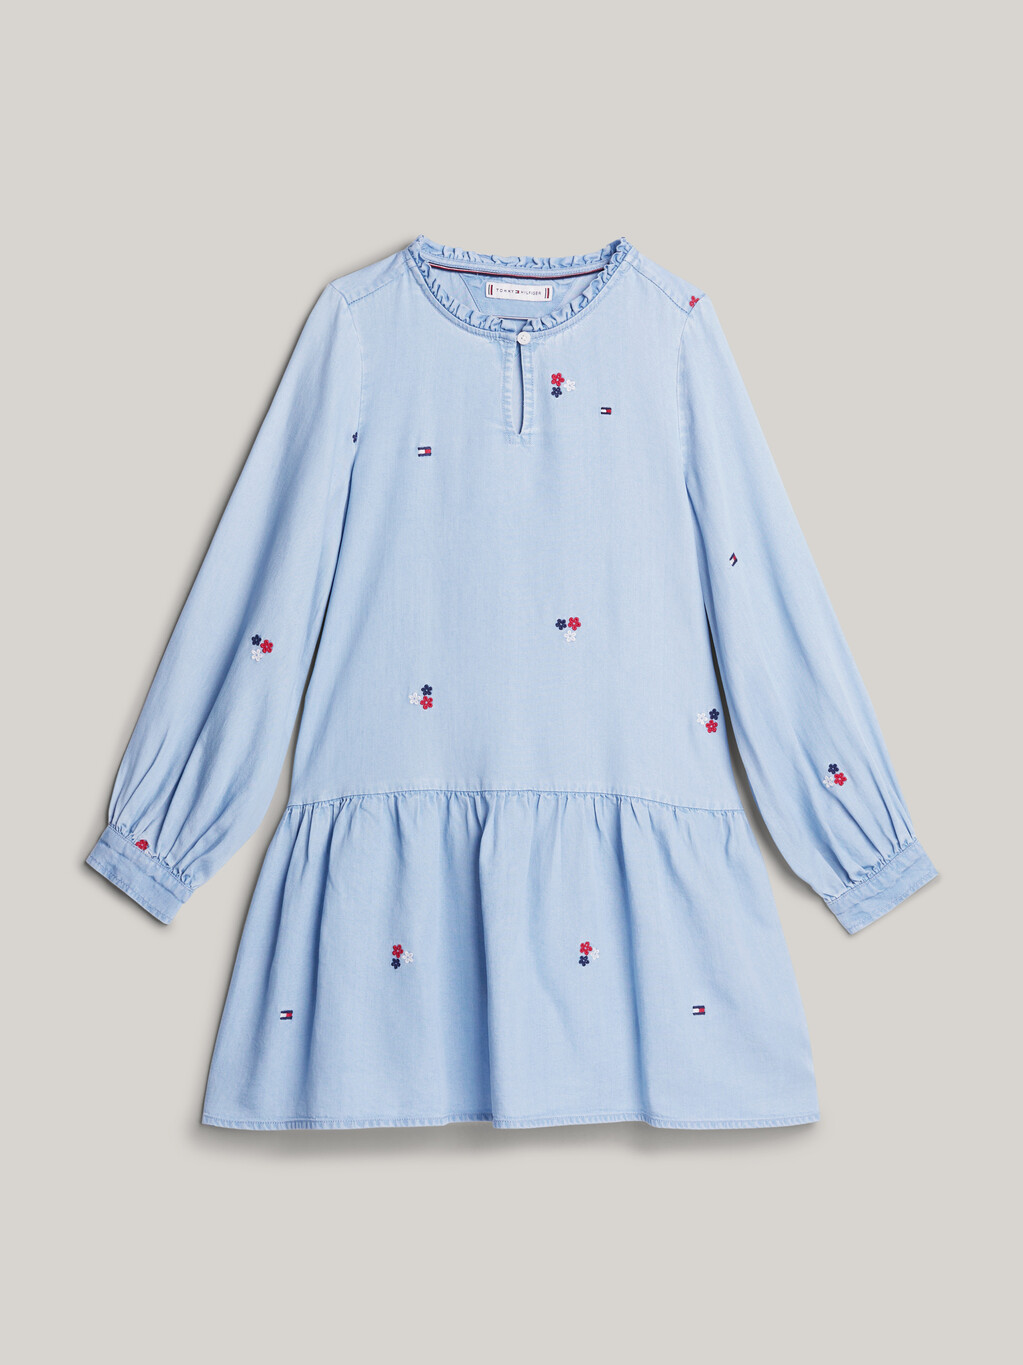 Floral Embroidery Fit And Flare Dress, Denim Medium, hi-res